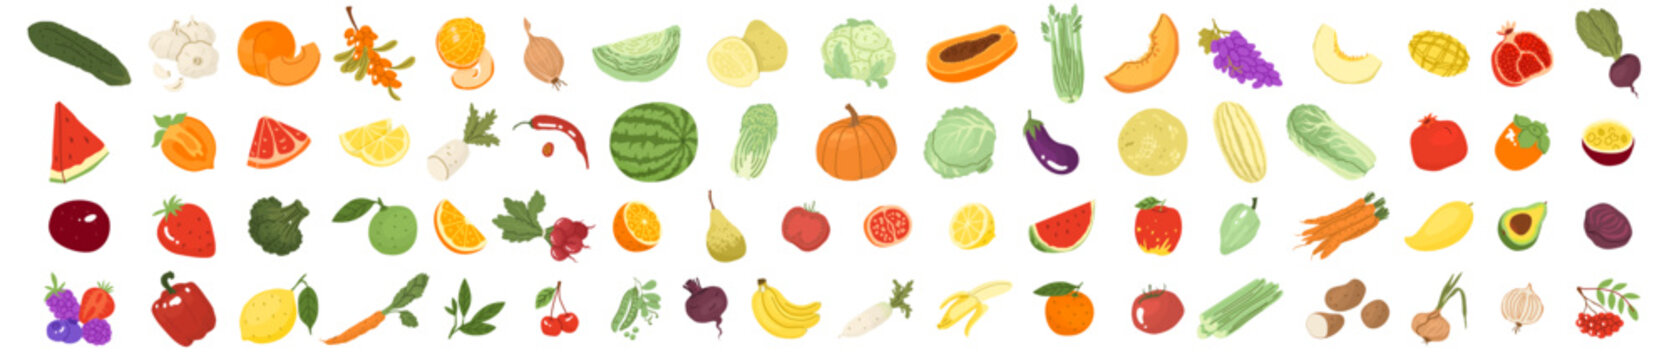 A set with vegetables and fruits. Farm products, organic farming. Different types of fruits and vegetables. Production of organic products. Vector illustration for farmers and food markets.